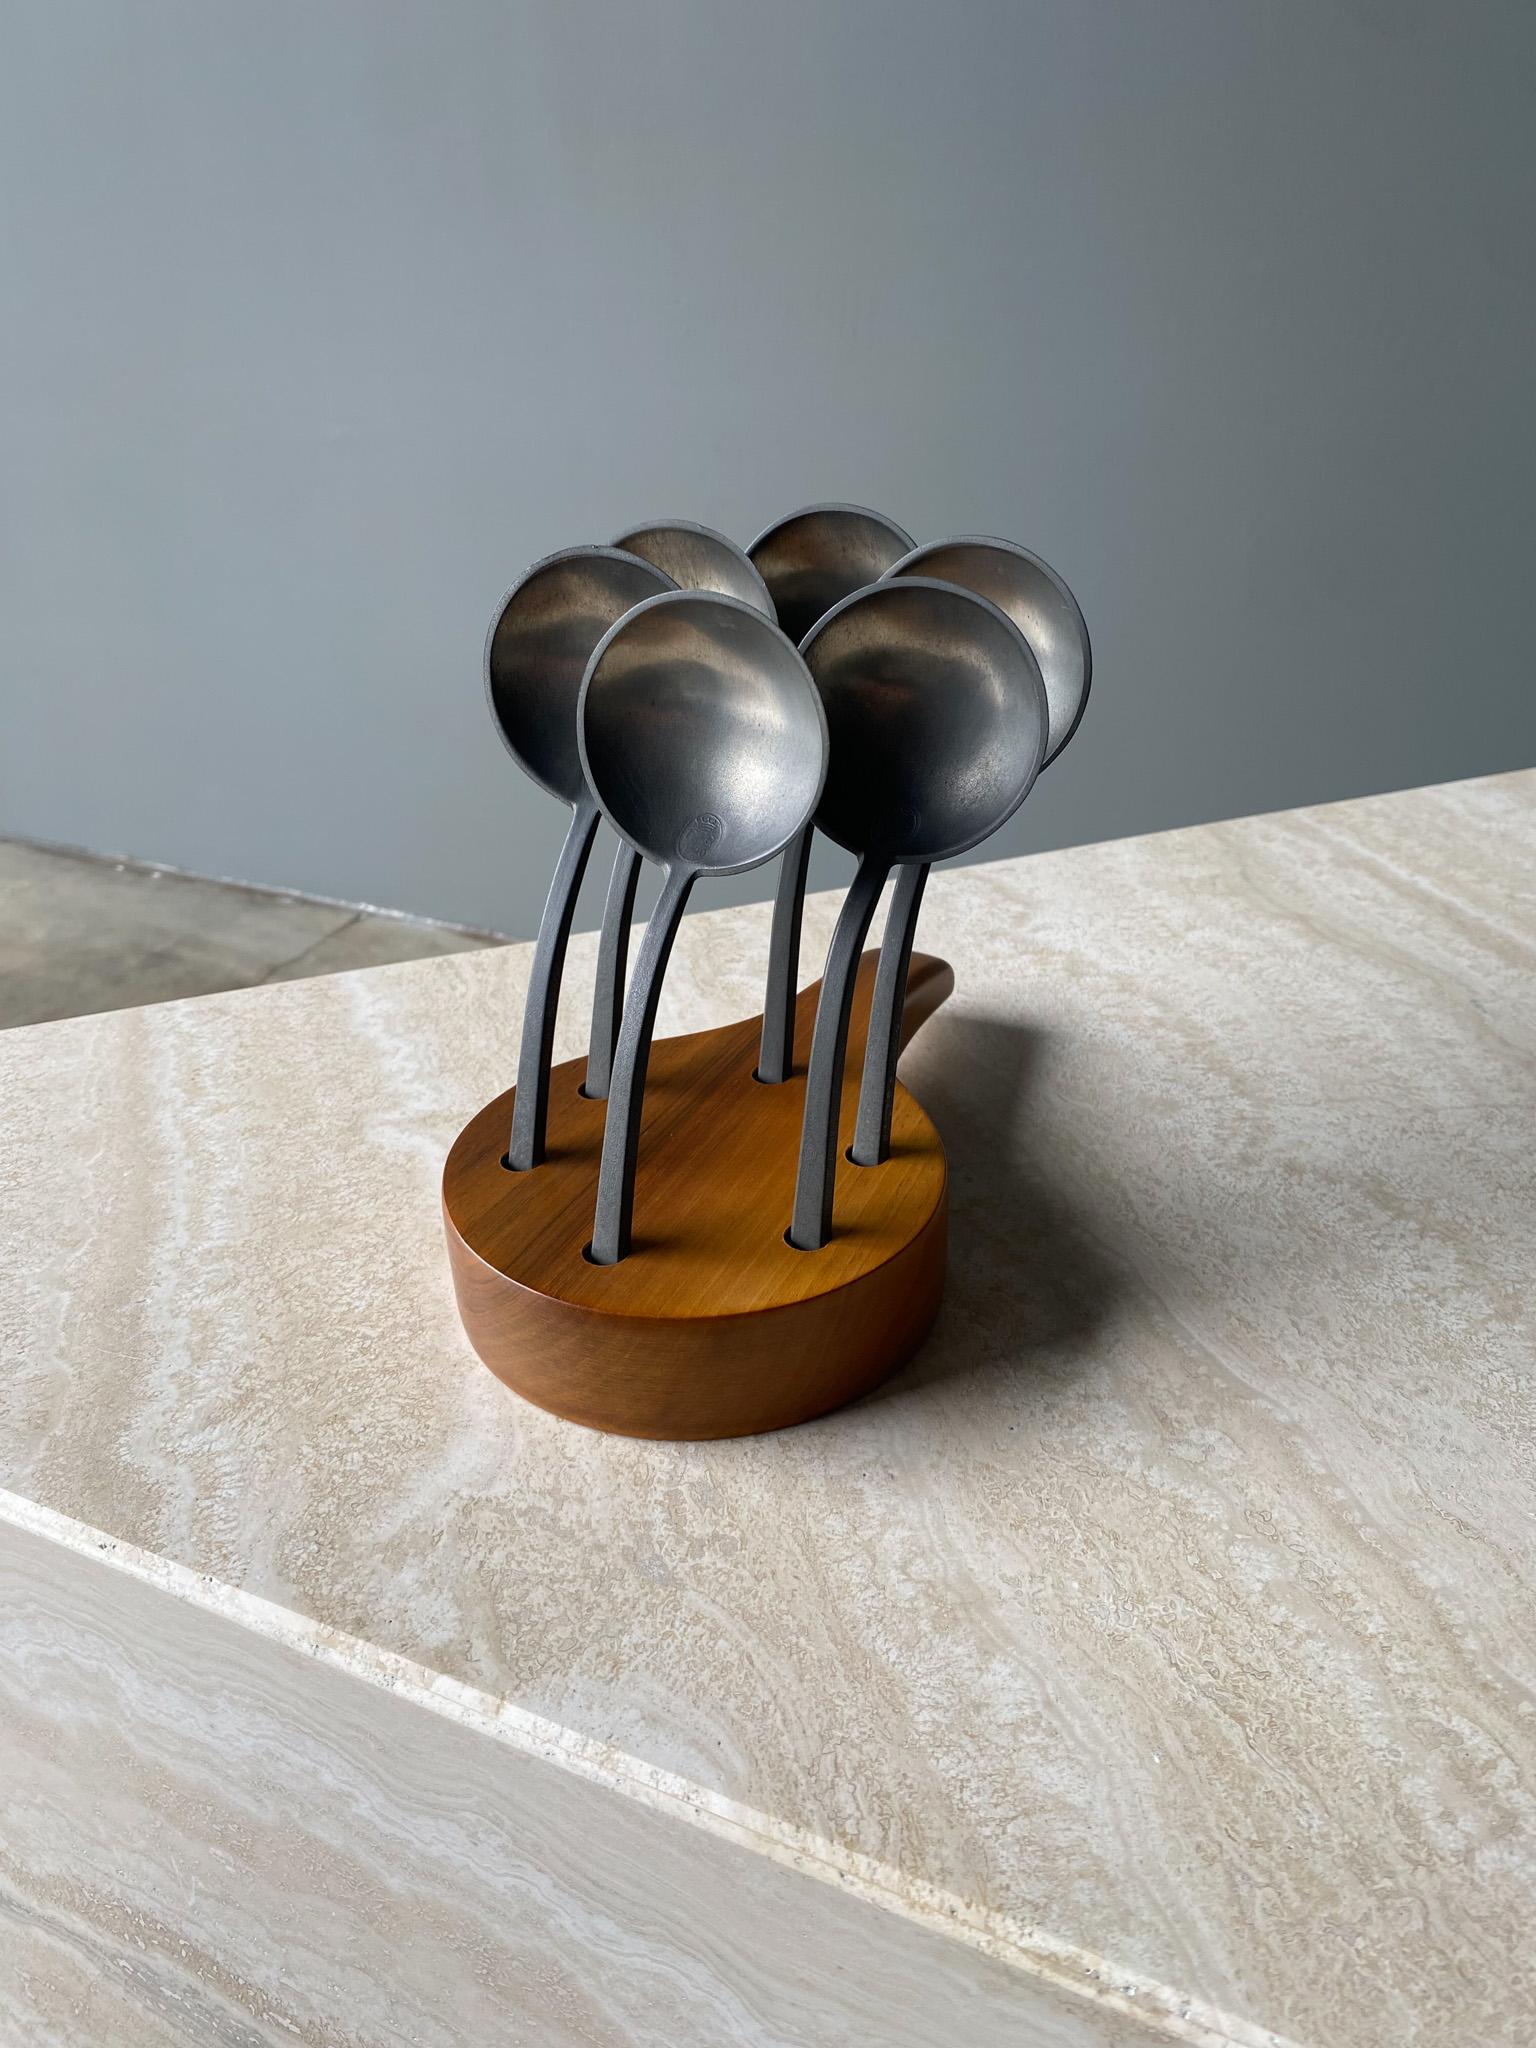 Antique Pewter Spoons On Custom Stand, set includes a custom wooden stand, markings on the spoon suggest they are European possibly from the 17th century, dated 1720.